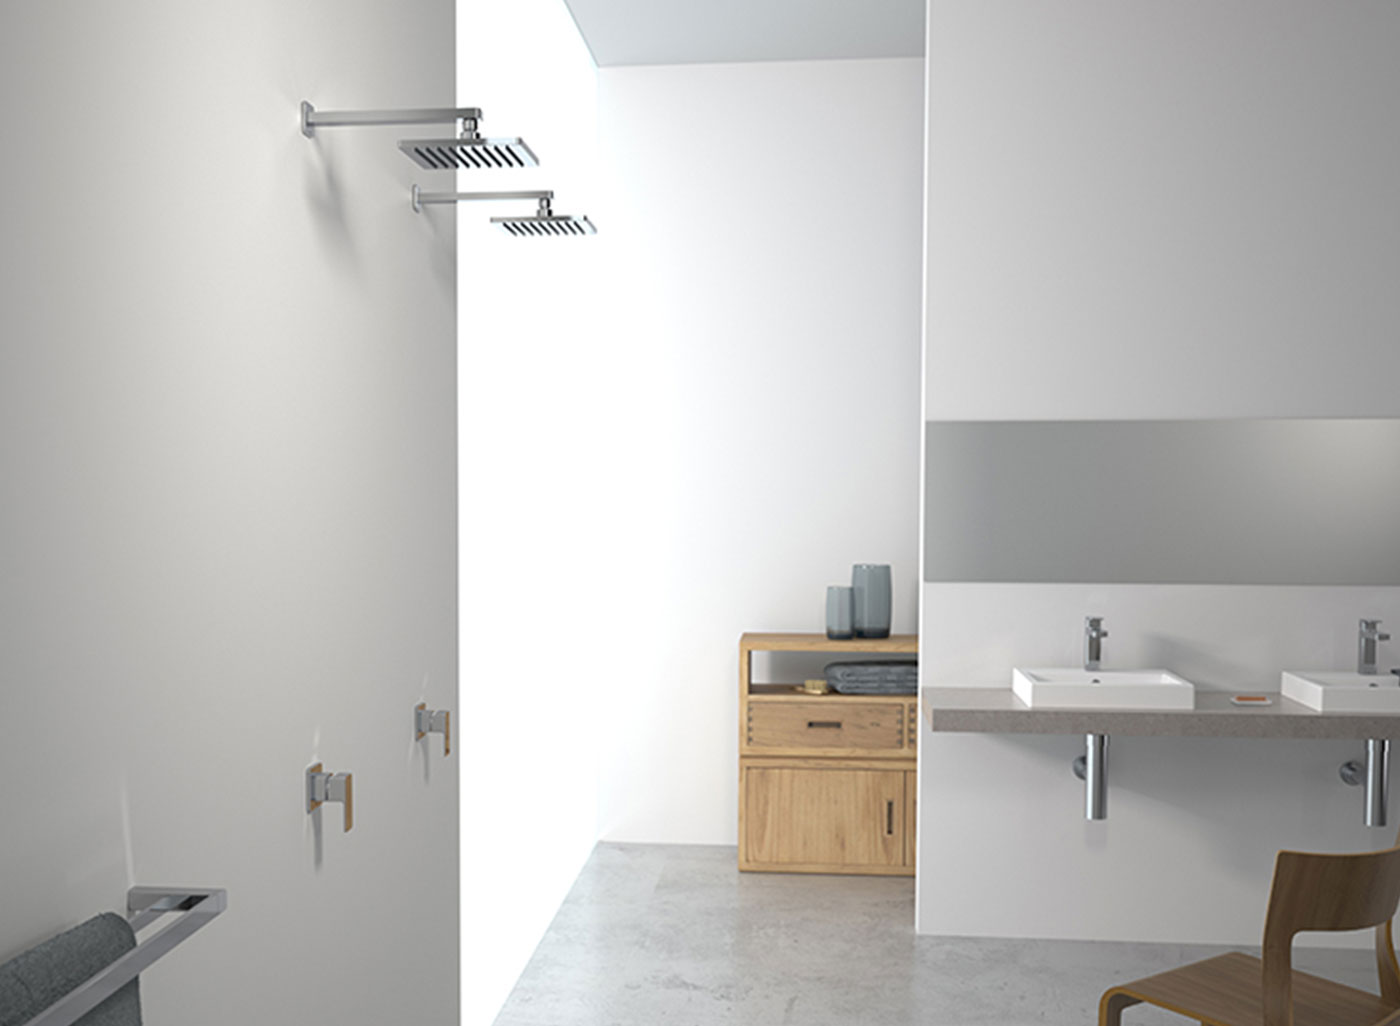 every aspect of the Epic range has been carefully considered. Epic's unrivalled technology ensures ease of installation and operation. Our most comprehensive range includes both bathroom and kitchen mixers